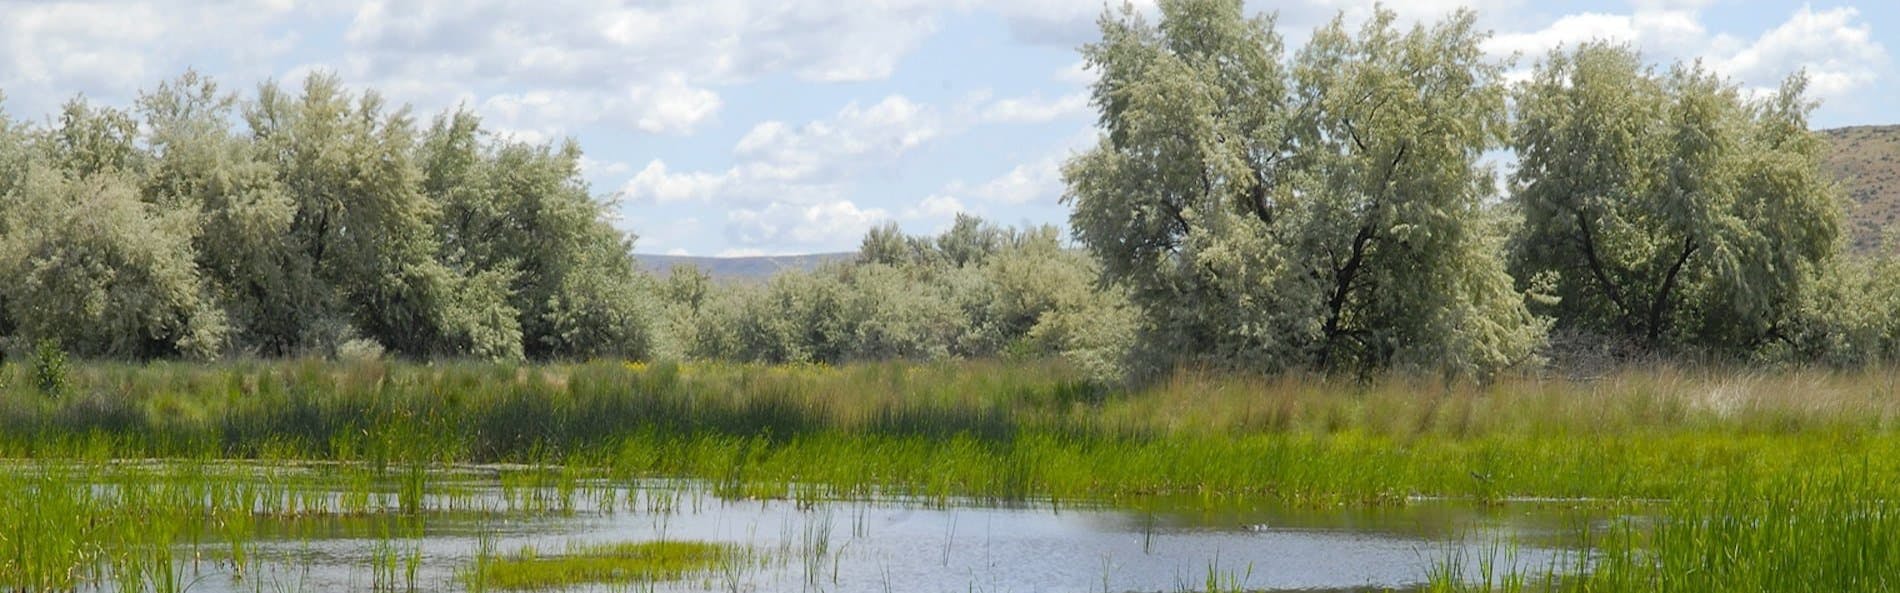 A body of water covered in grasses with trees on the banks in the background. Above, the sky is light blue and full of fluffy white clouds.